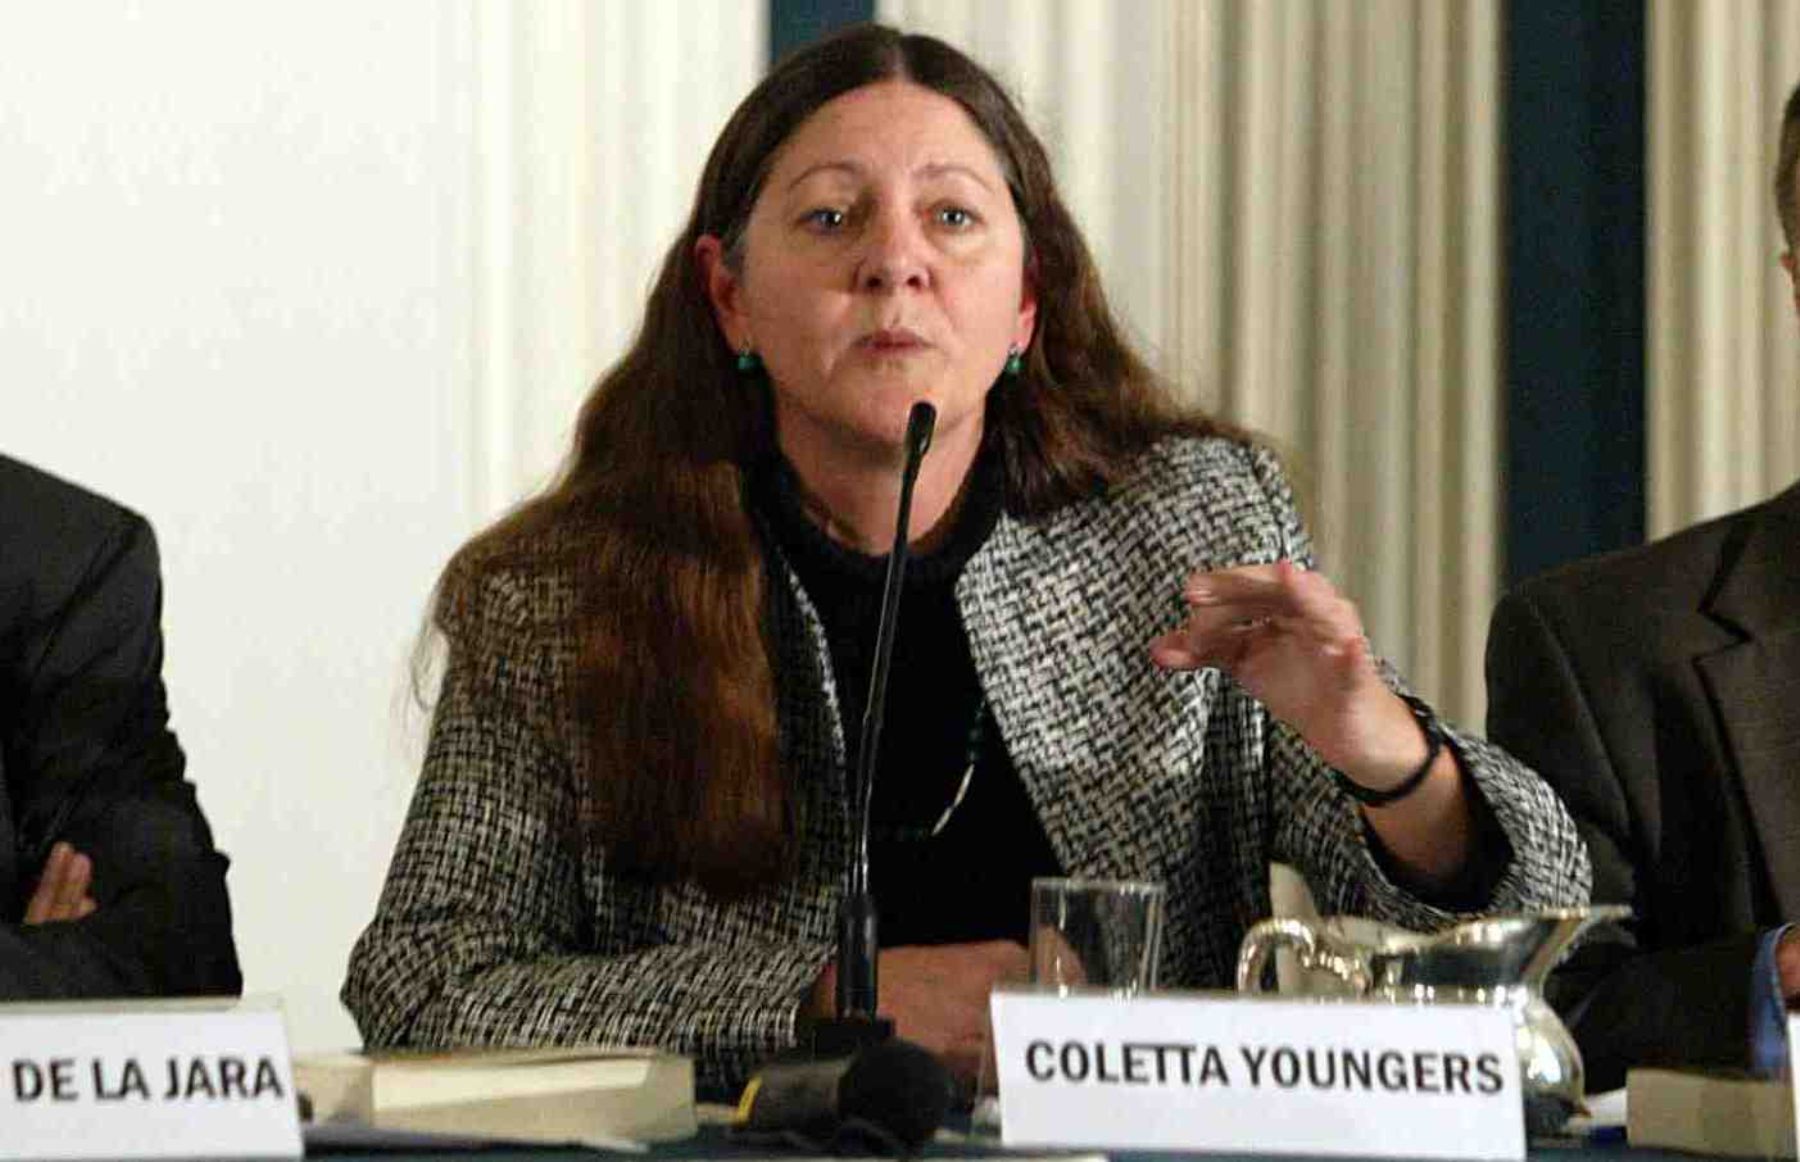 Senior Associate with the Washington Office on Latin America (WOLA), Coletta Youngers